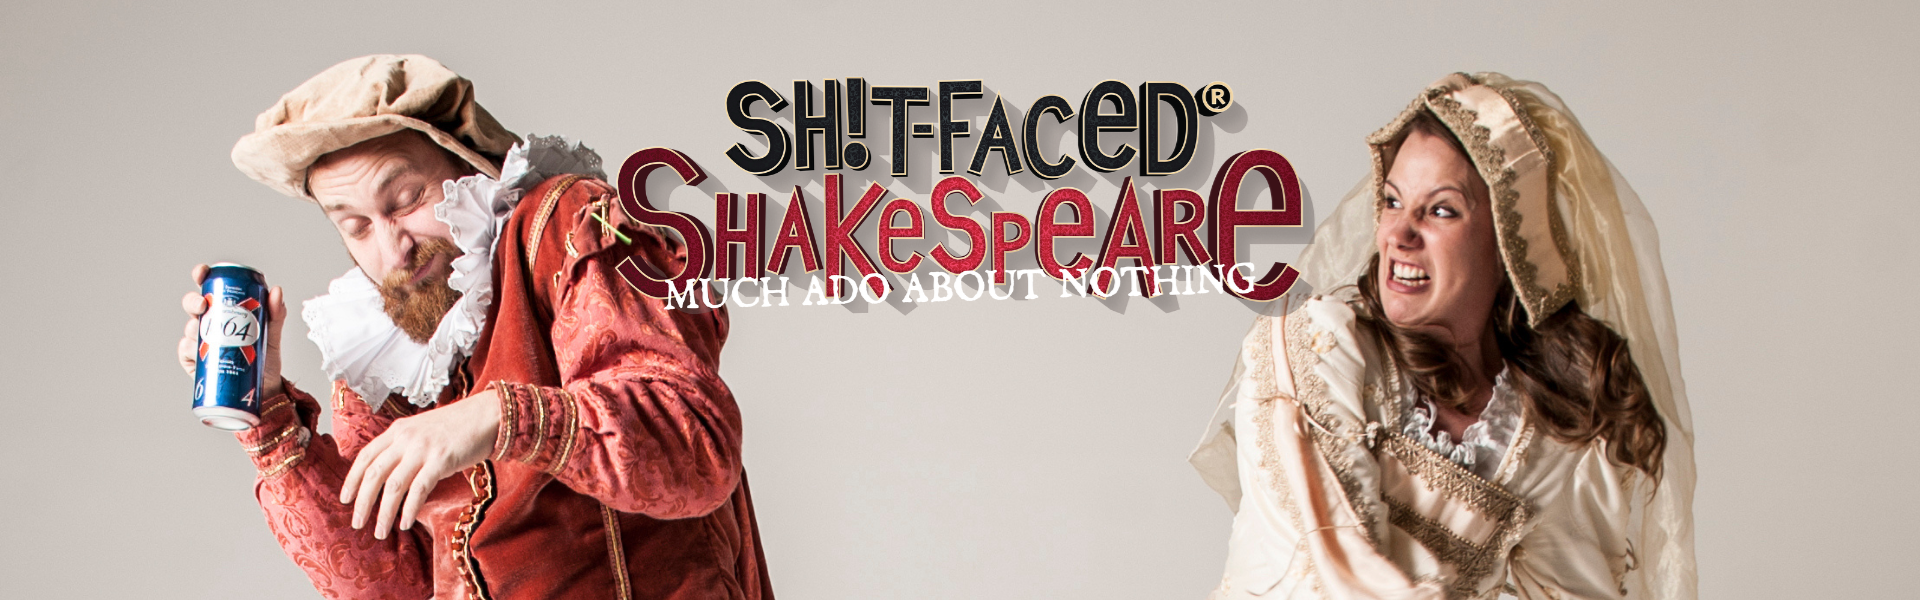 Sh!t-faced Shakespeare – Much Ado About Nothing